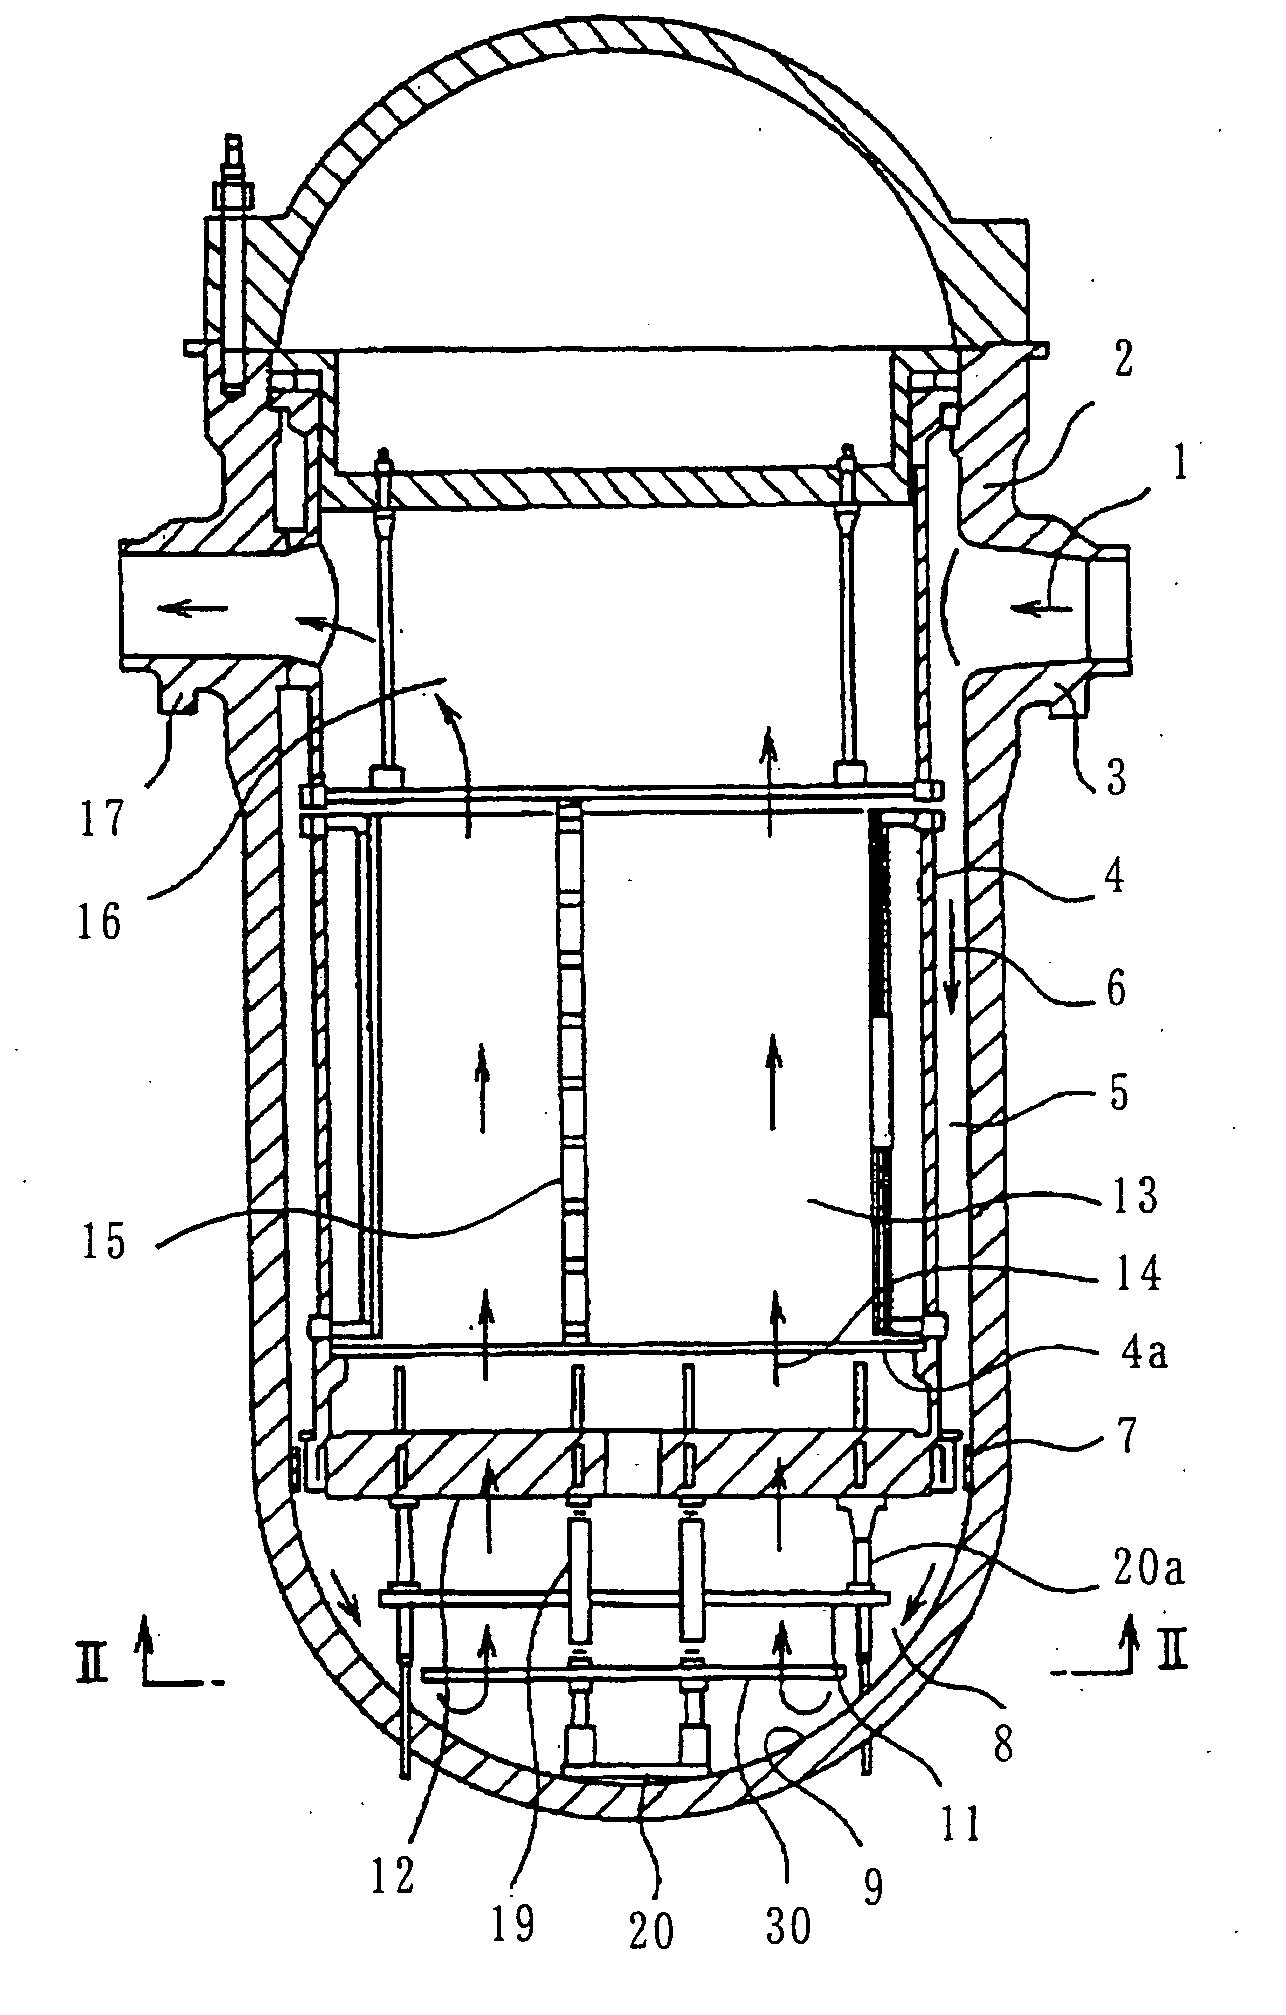 Nuclear reactor internal structure